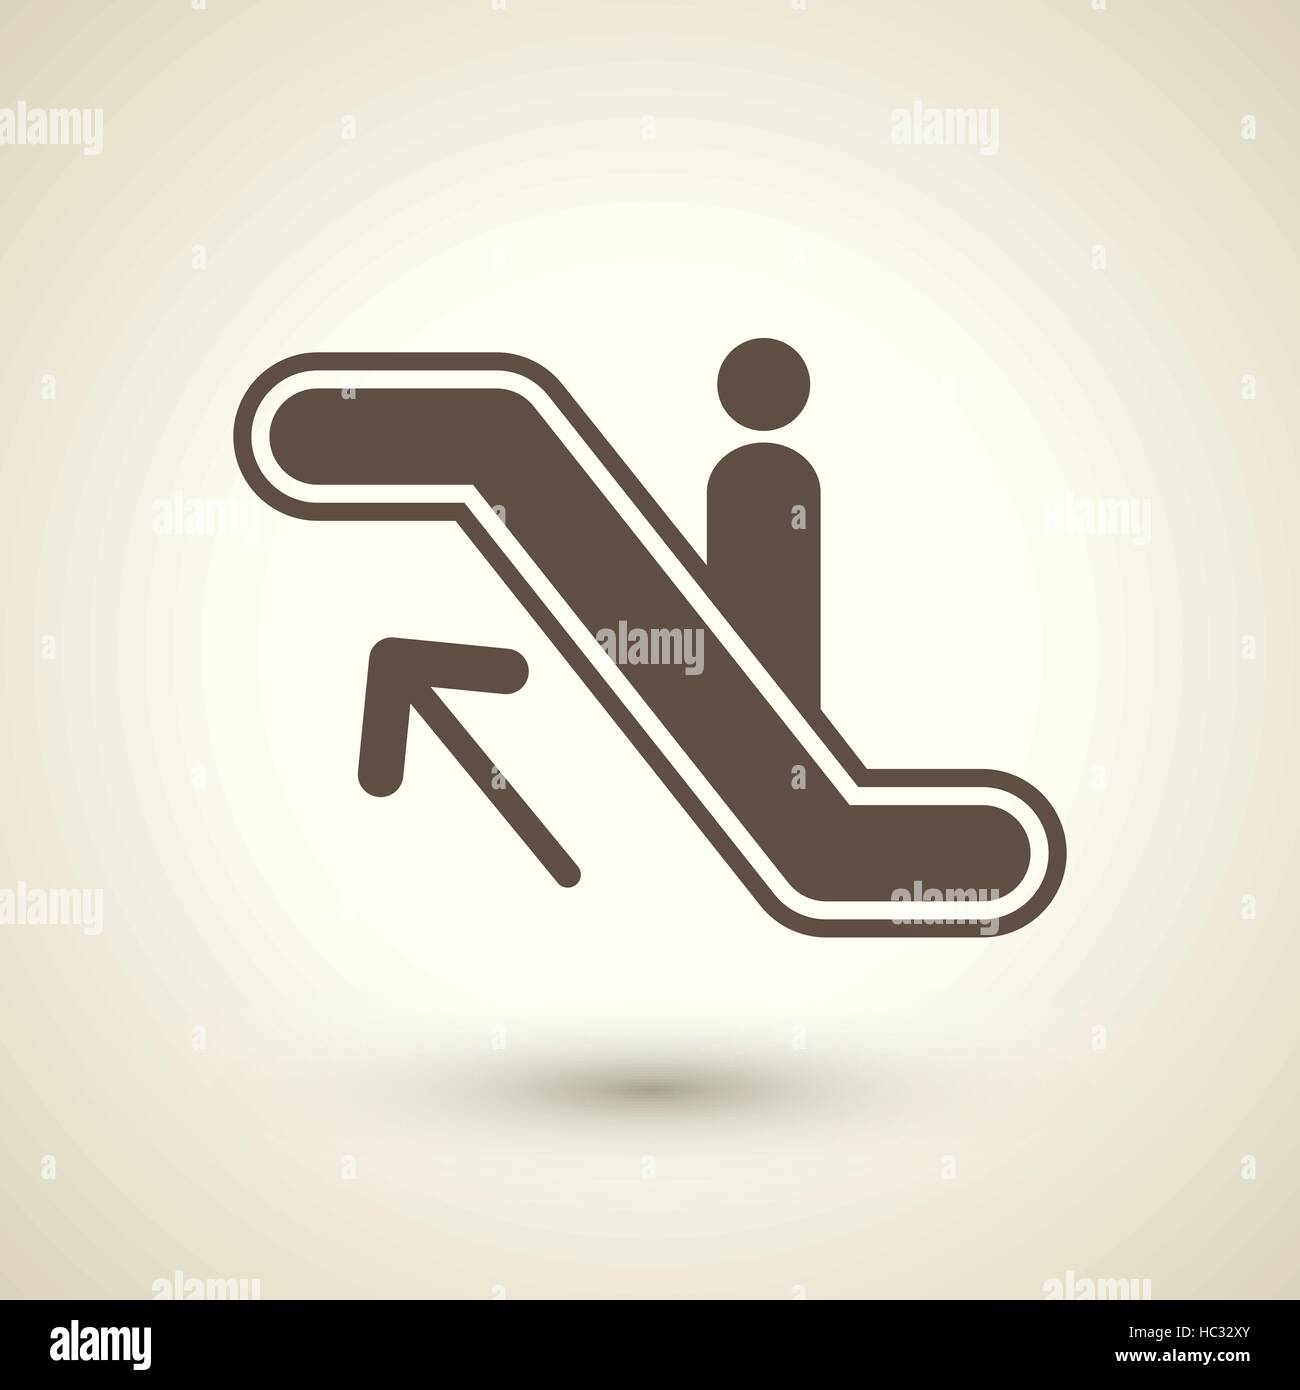 retro style escalator icon isolated on brown background Stock Vector